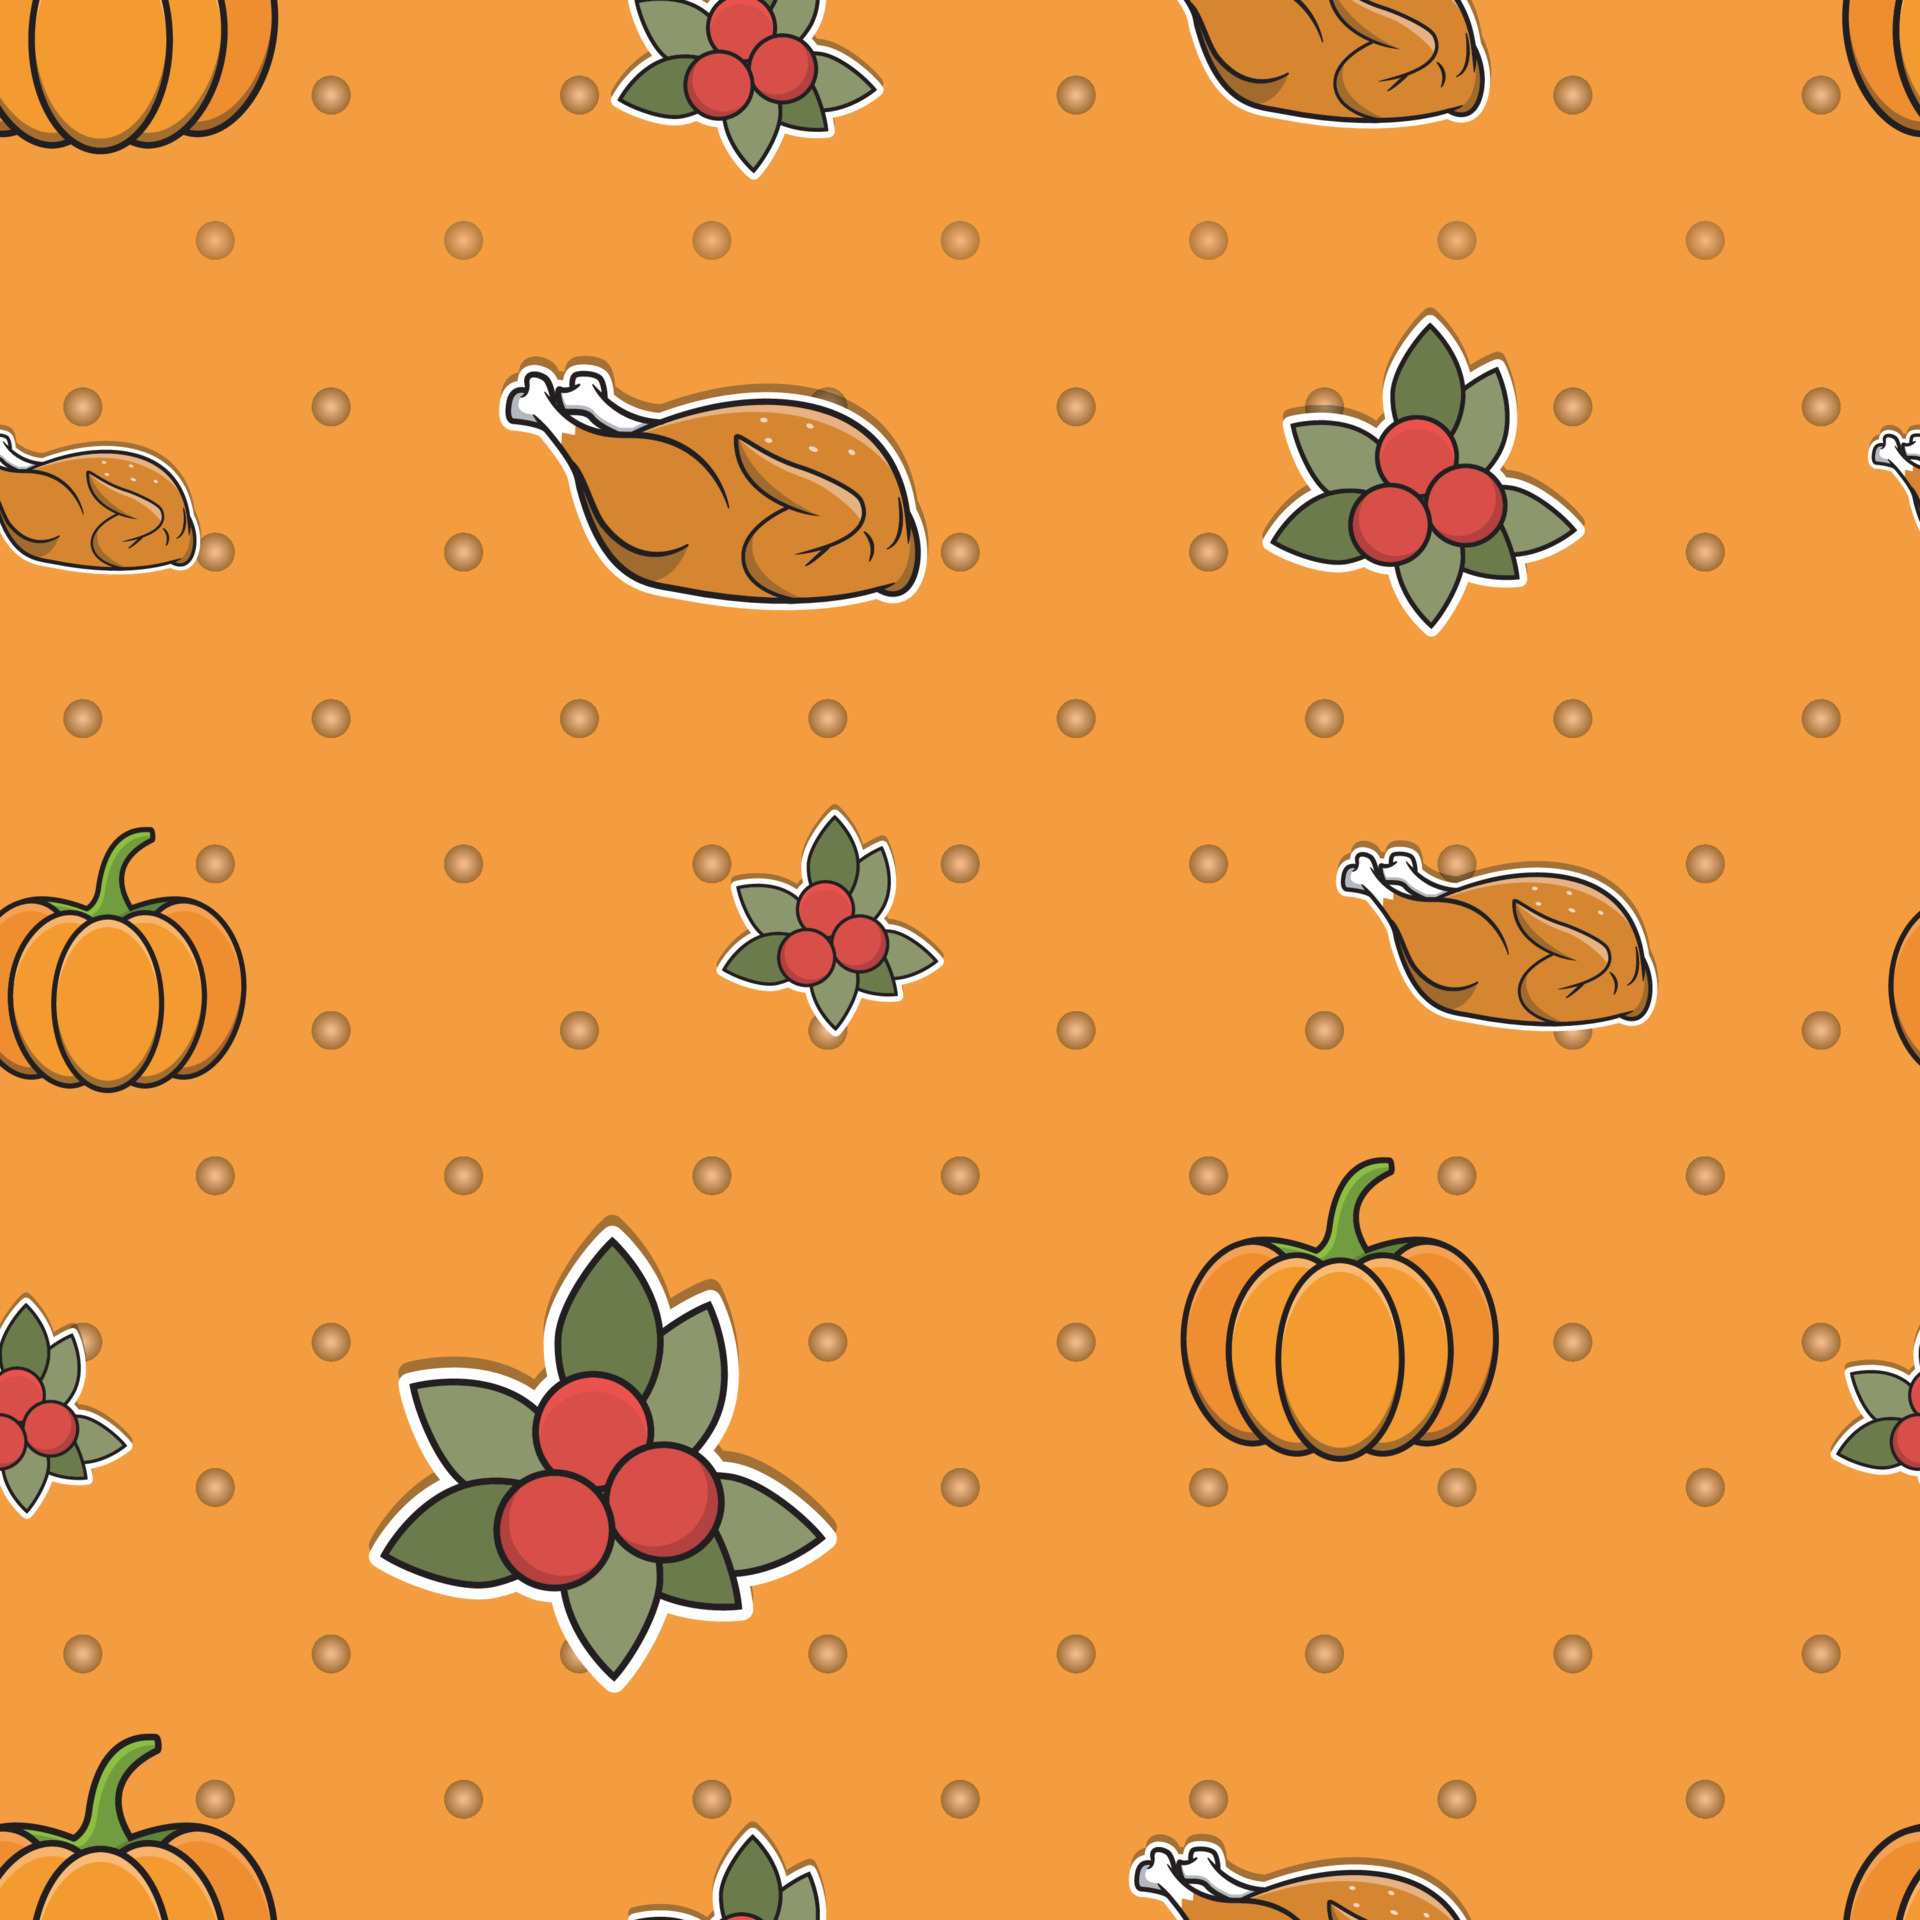 Cute seamless Country Fall patterns for Wallpaper and Wall Design With Pumpkins, Chickens, and Cherrys